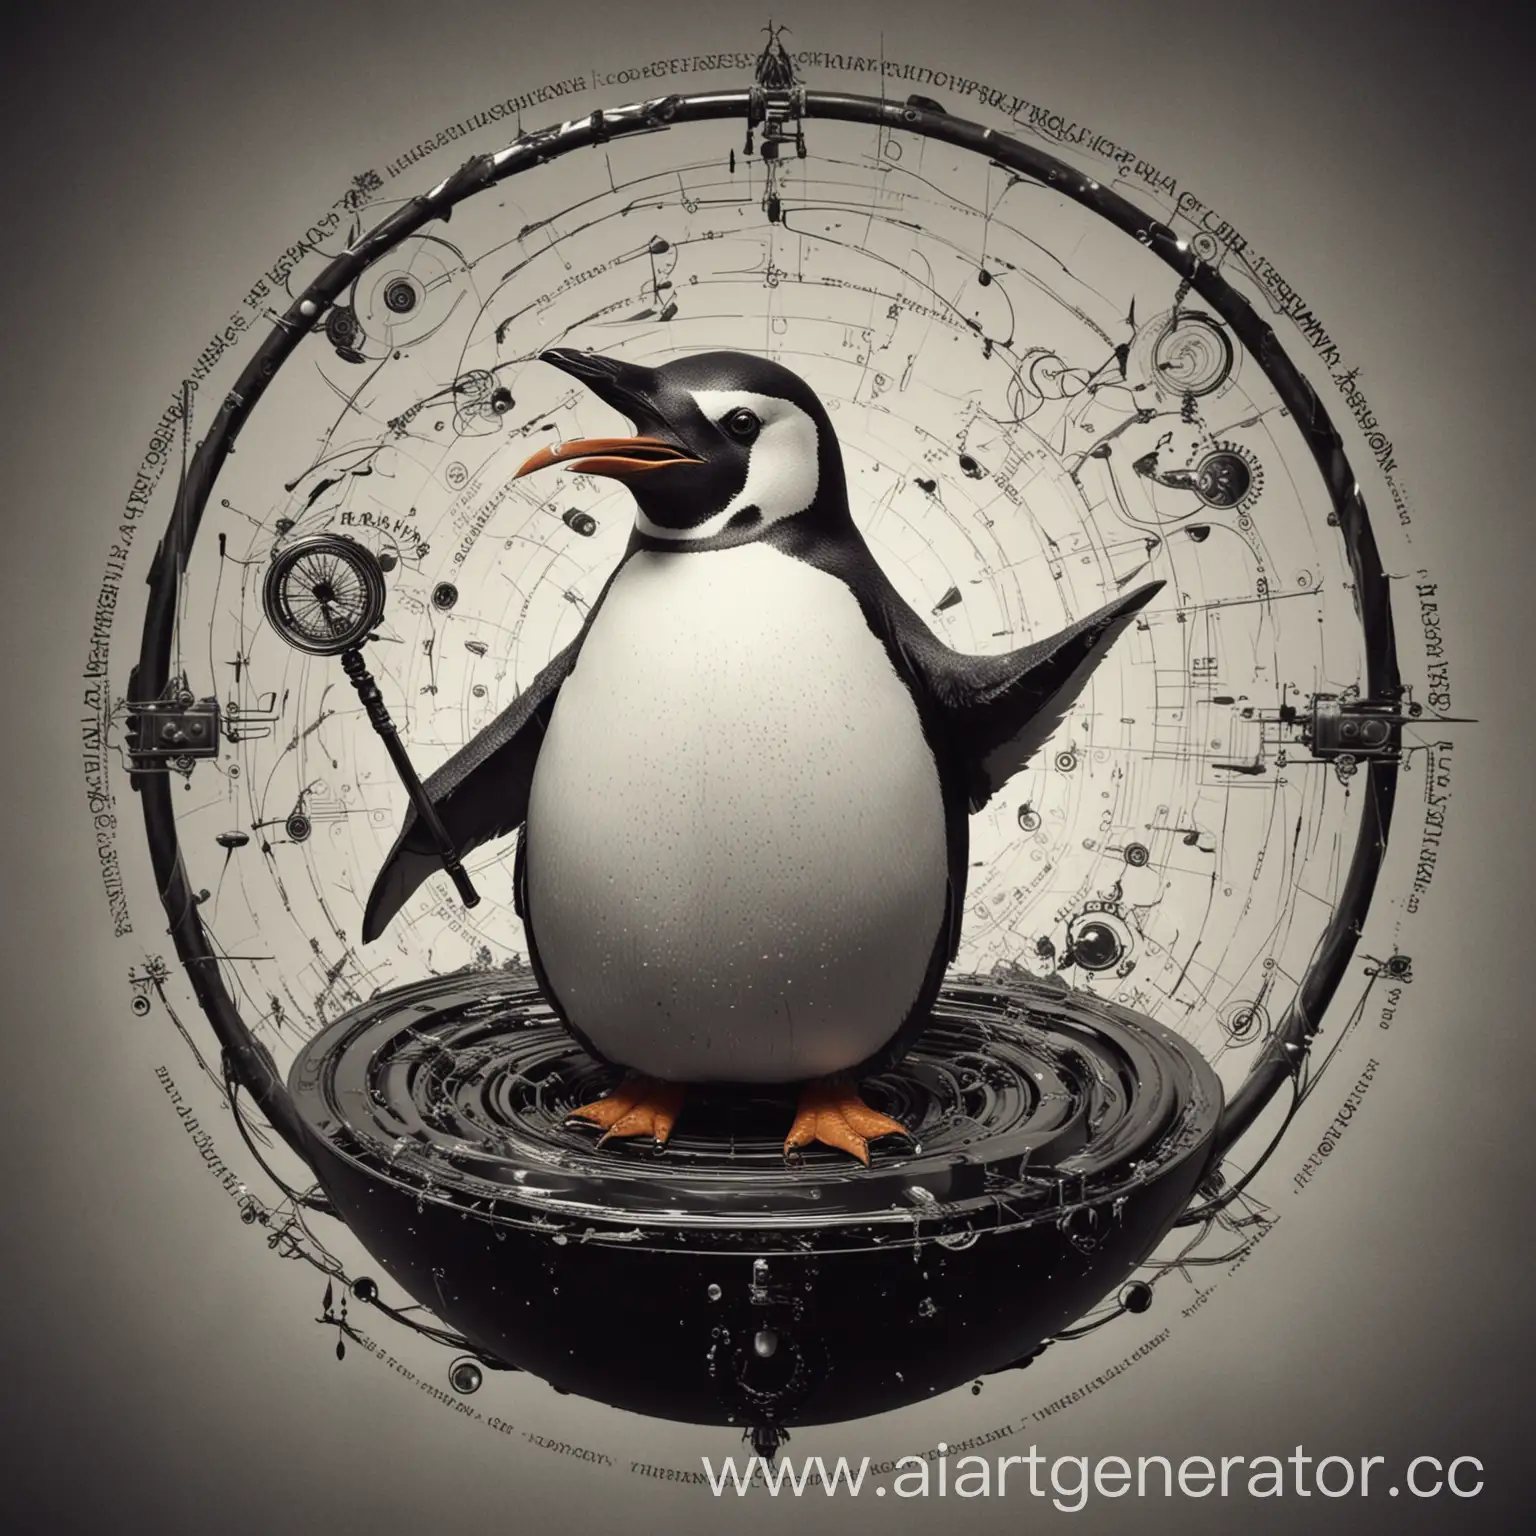 penguin in a whirlpool of spells. Bauhaus style and constructivism. White and black colors. The graphics are in steampunk style. The penguin is holding a magic wand.